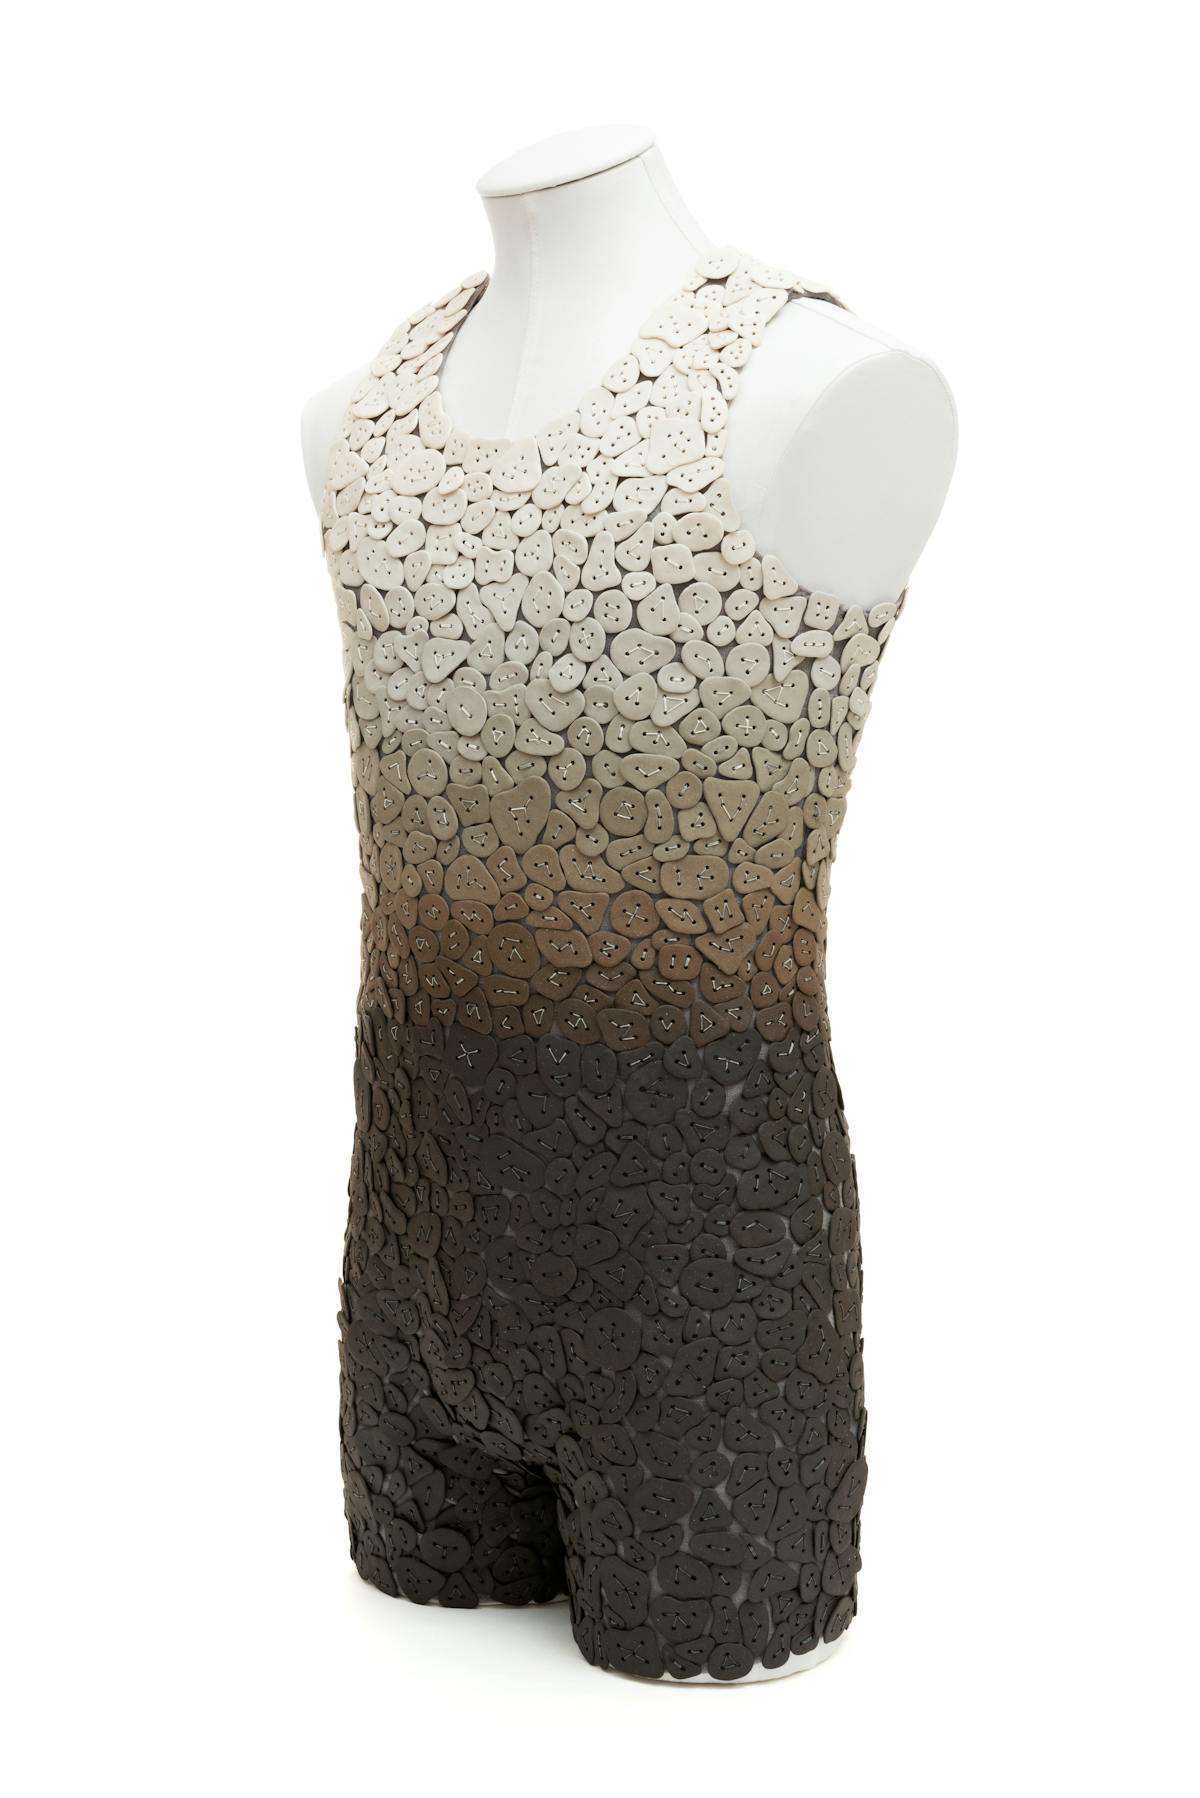 mens one-peice swimsuit made from ceramic tiles in a gradient of brown up to cream displayed on a manikin